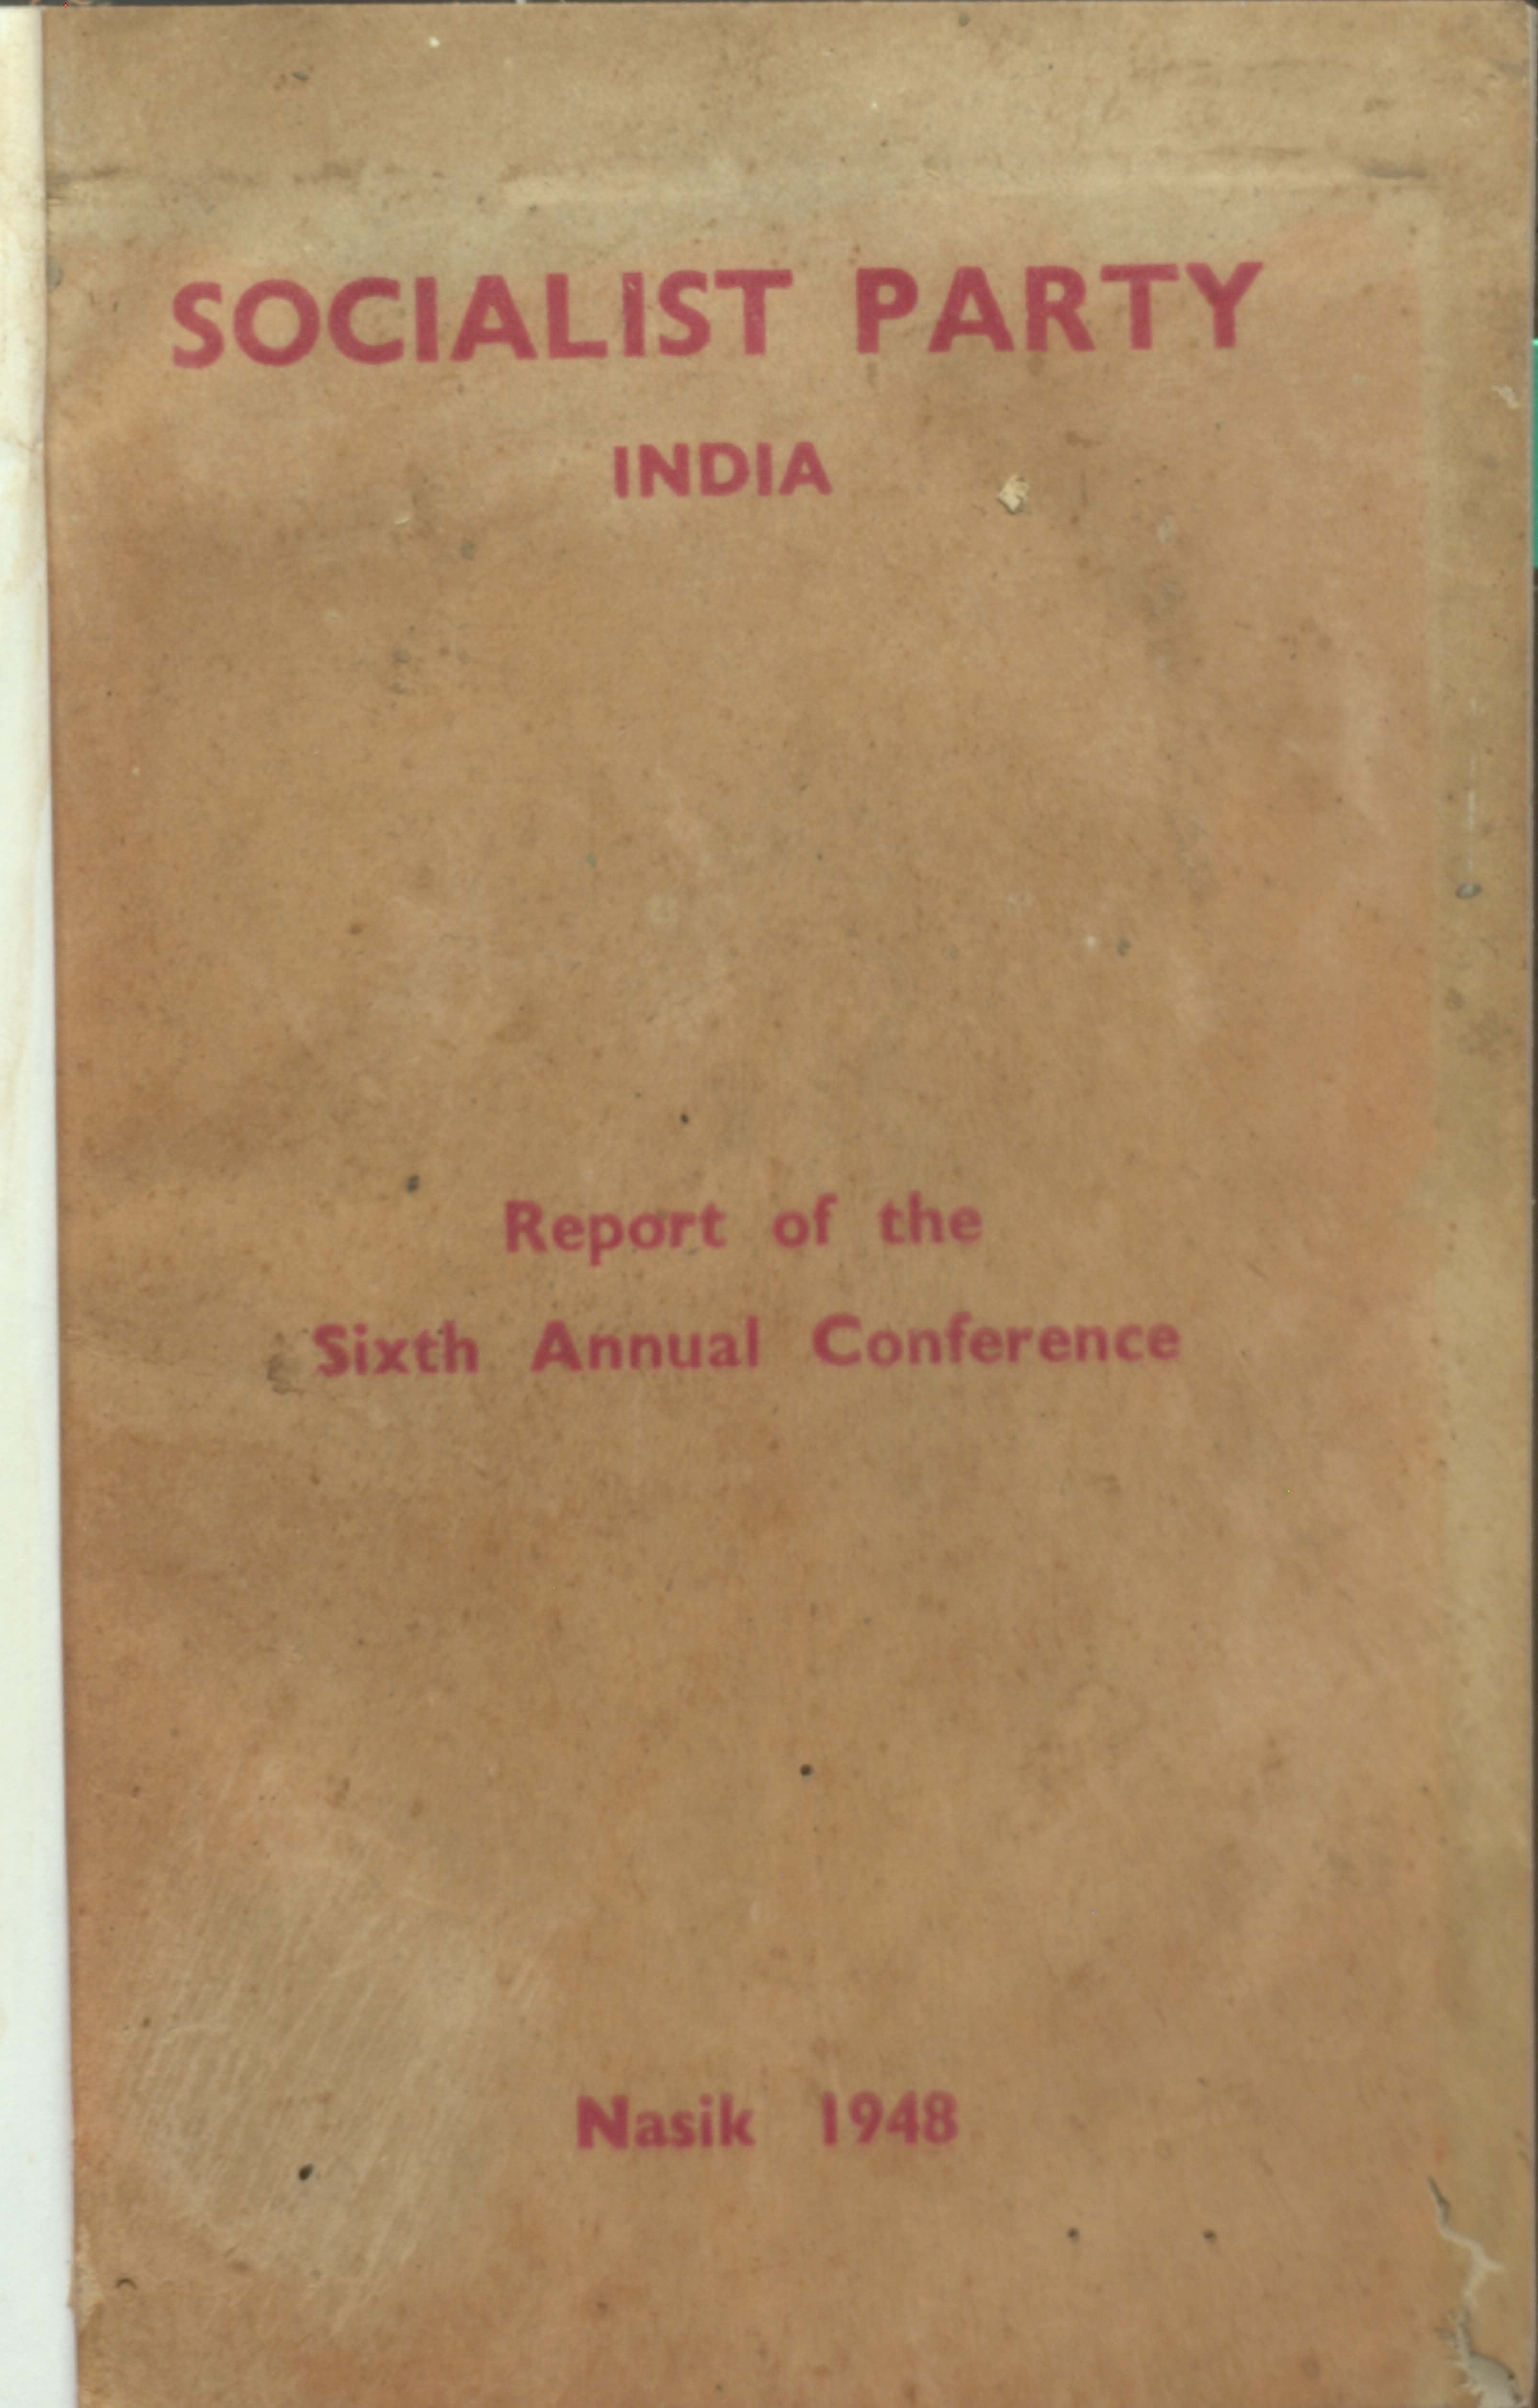 Socialist party india report of the sixth annual conference(1948)